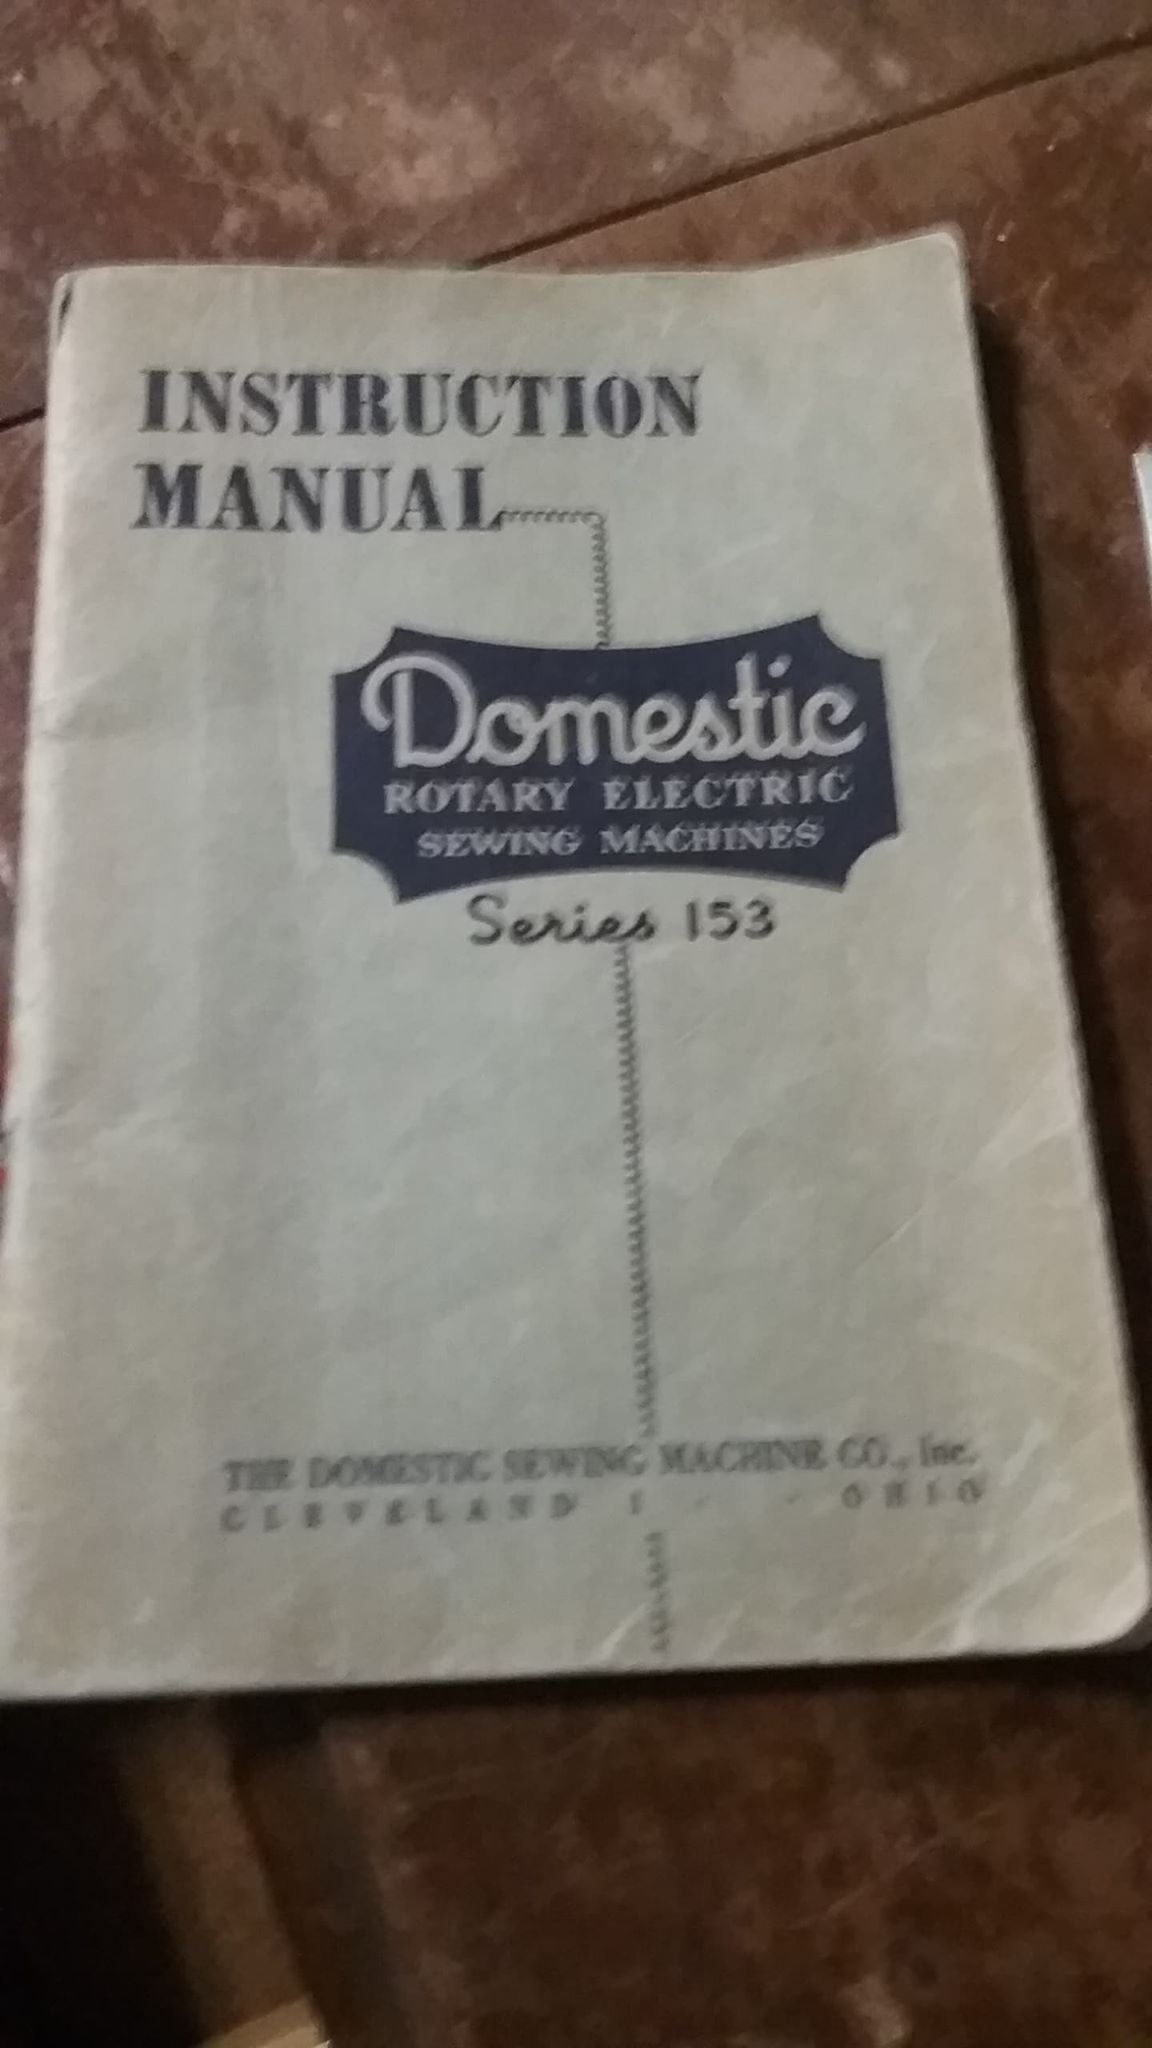 1948 Domestic Rotary Electric Sewing Machine Series 153 Quiltingboard